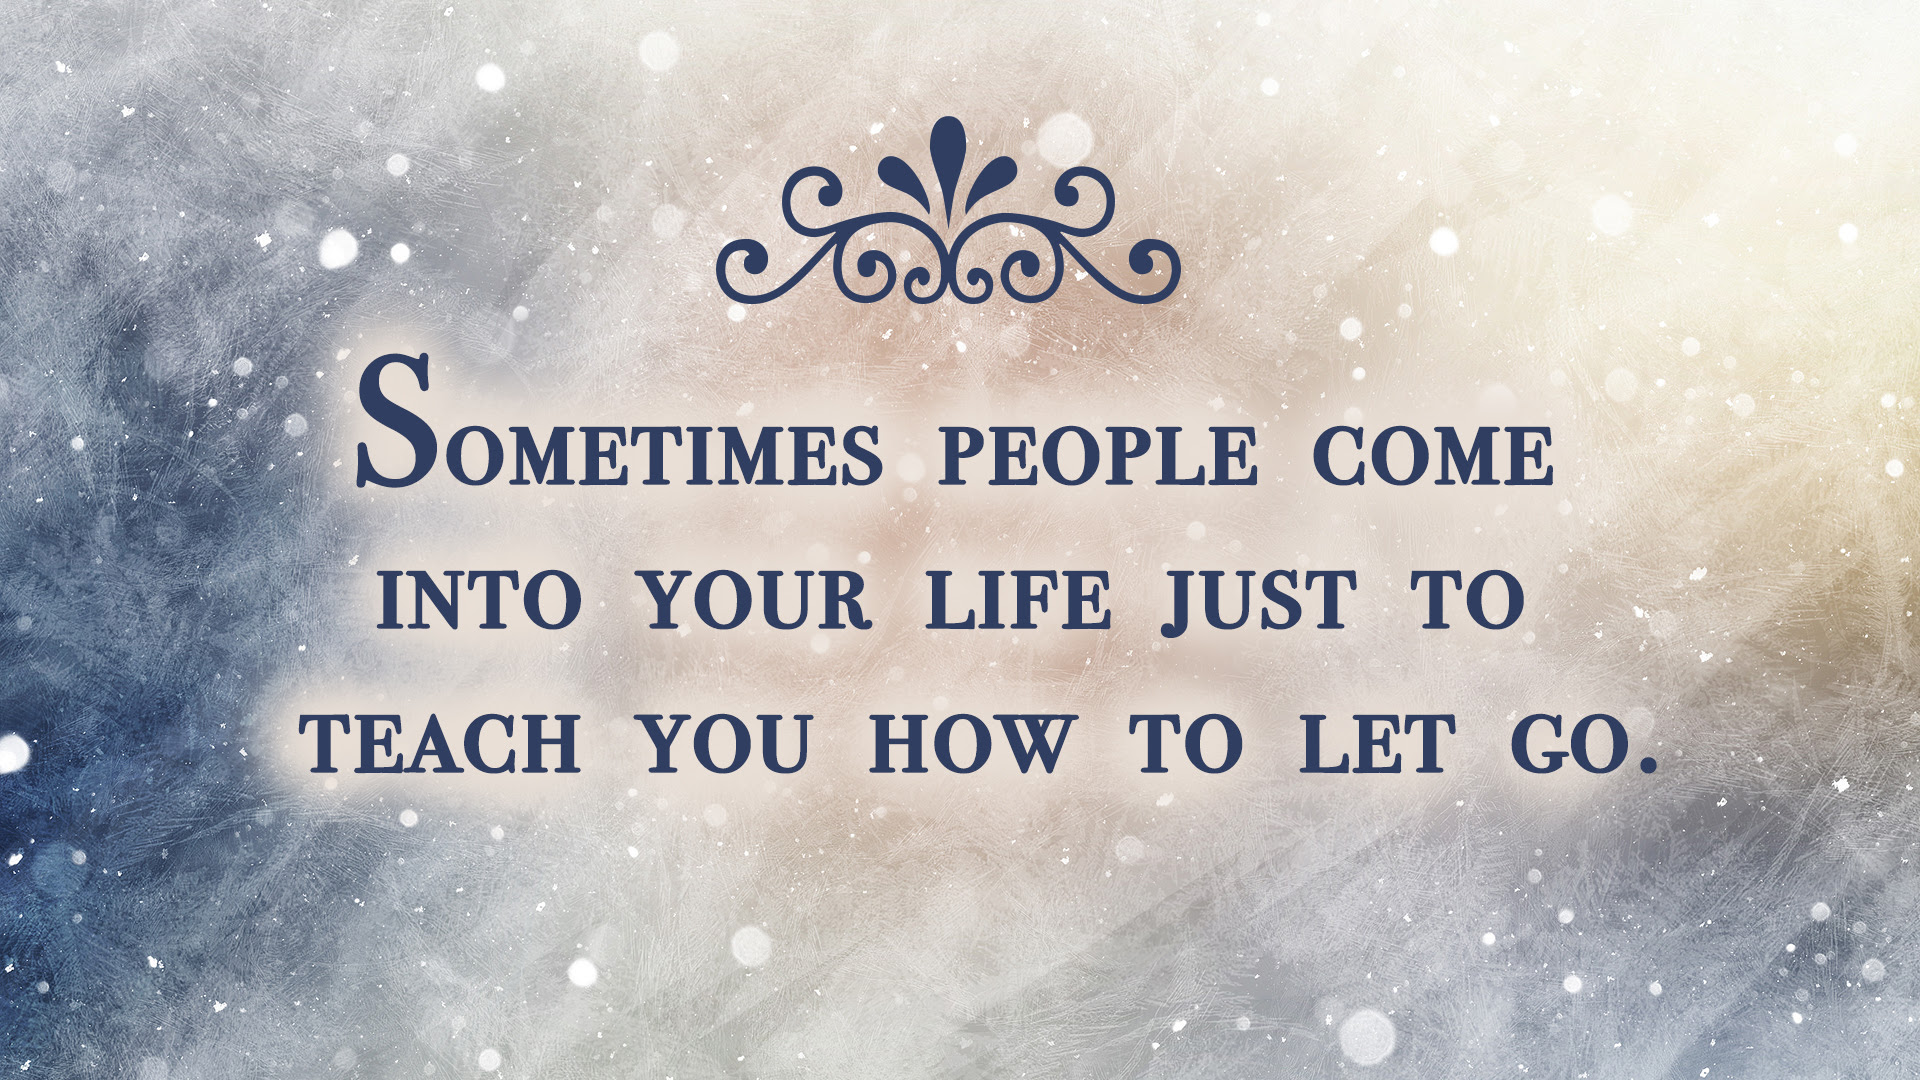 Sometimes people e into your life just to teach you how to let go